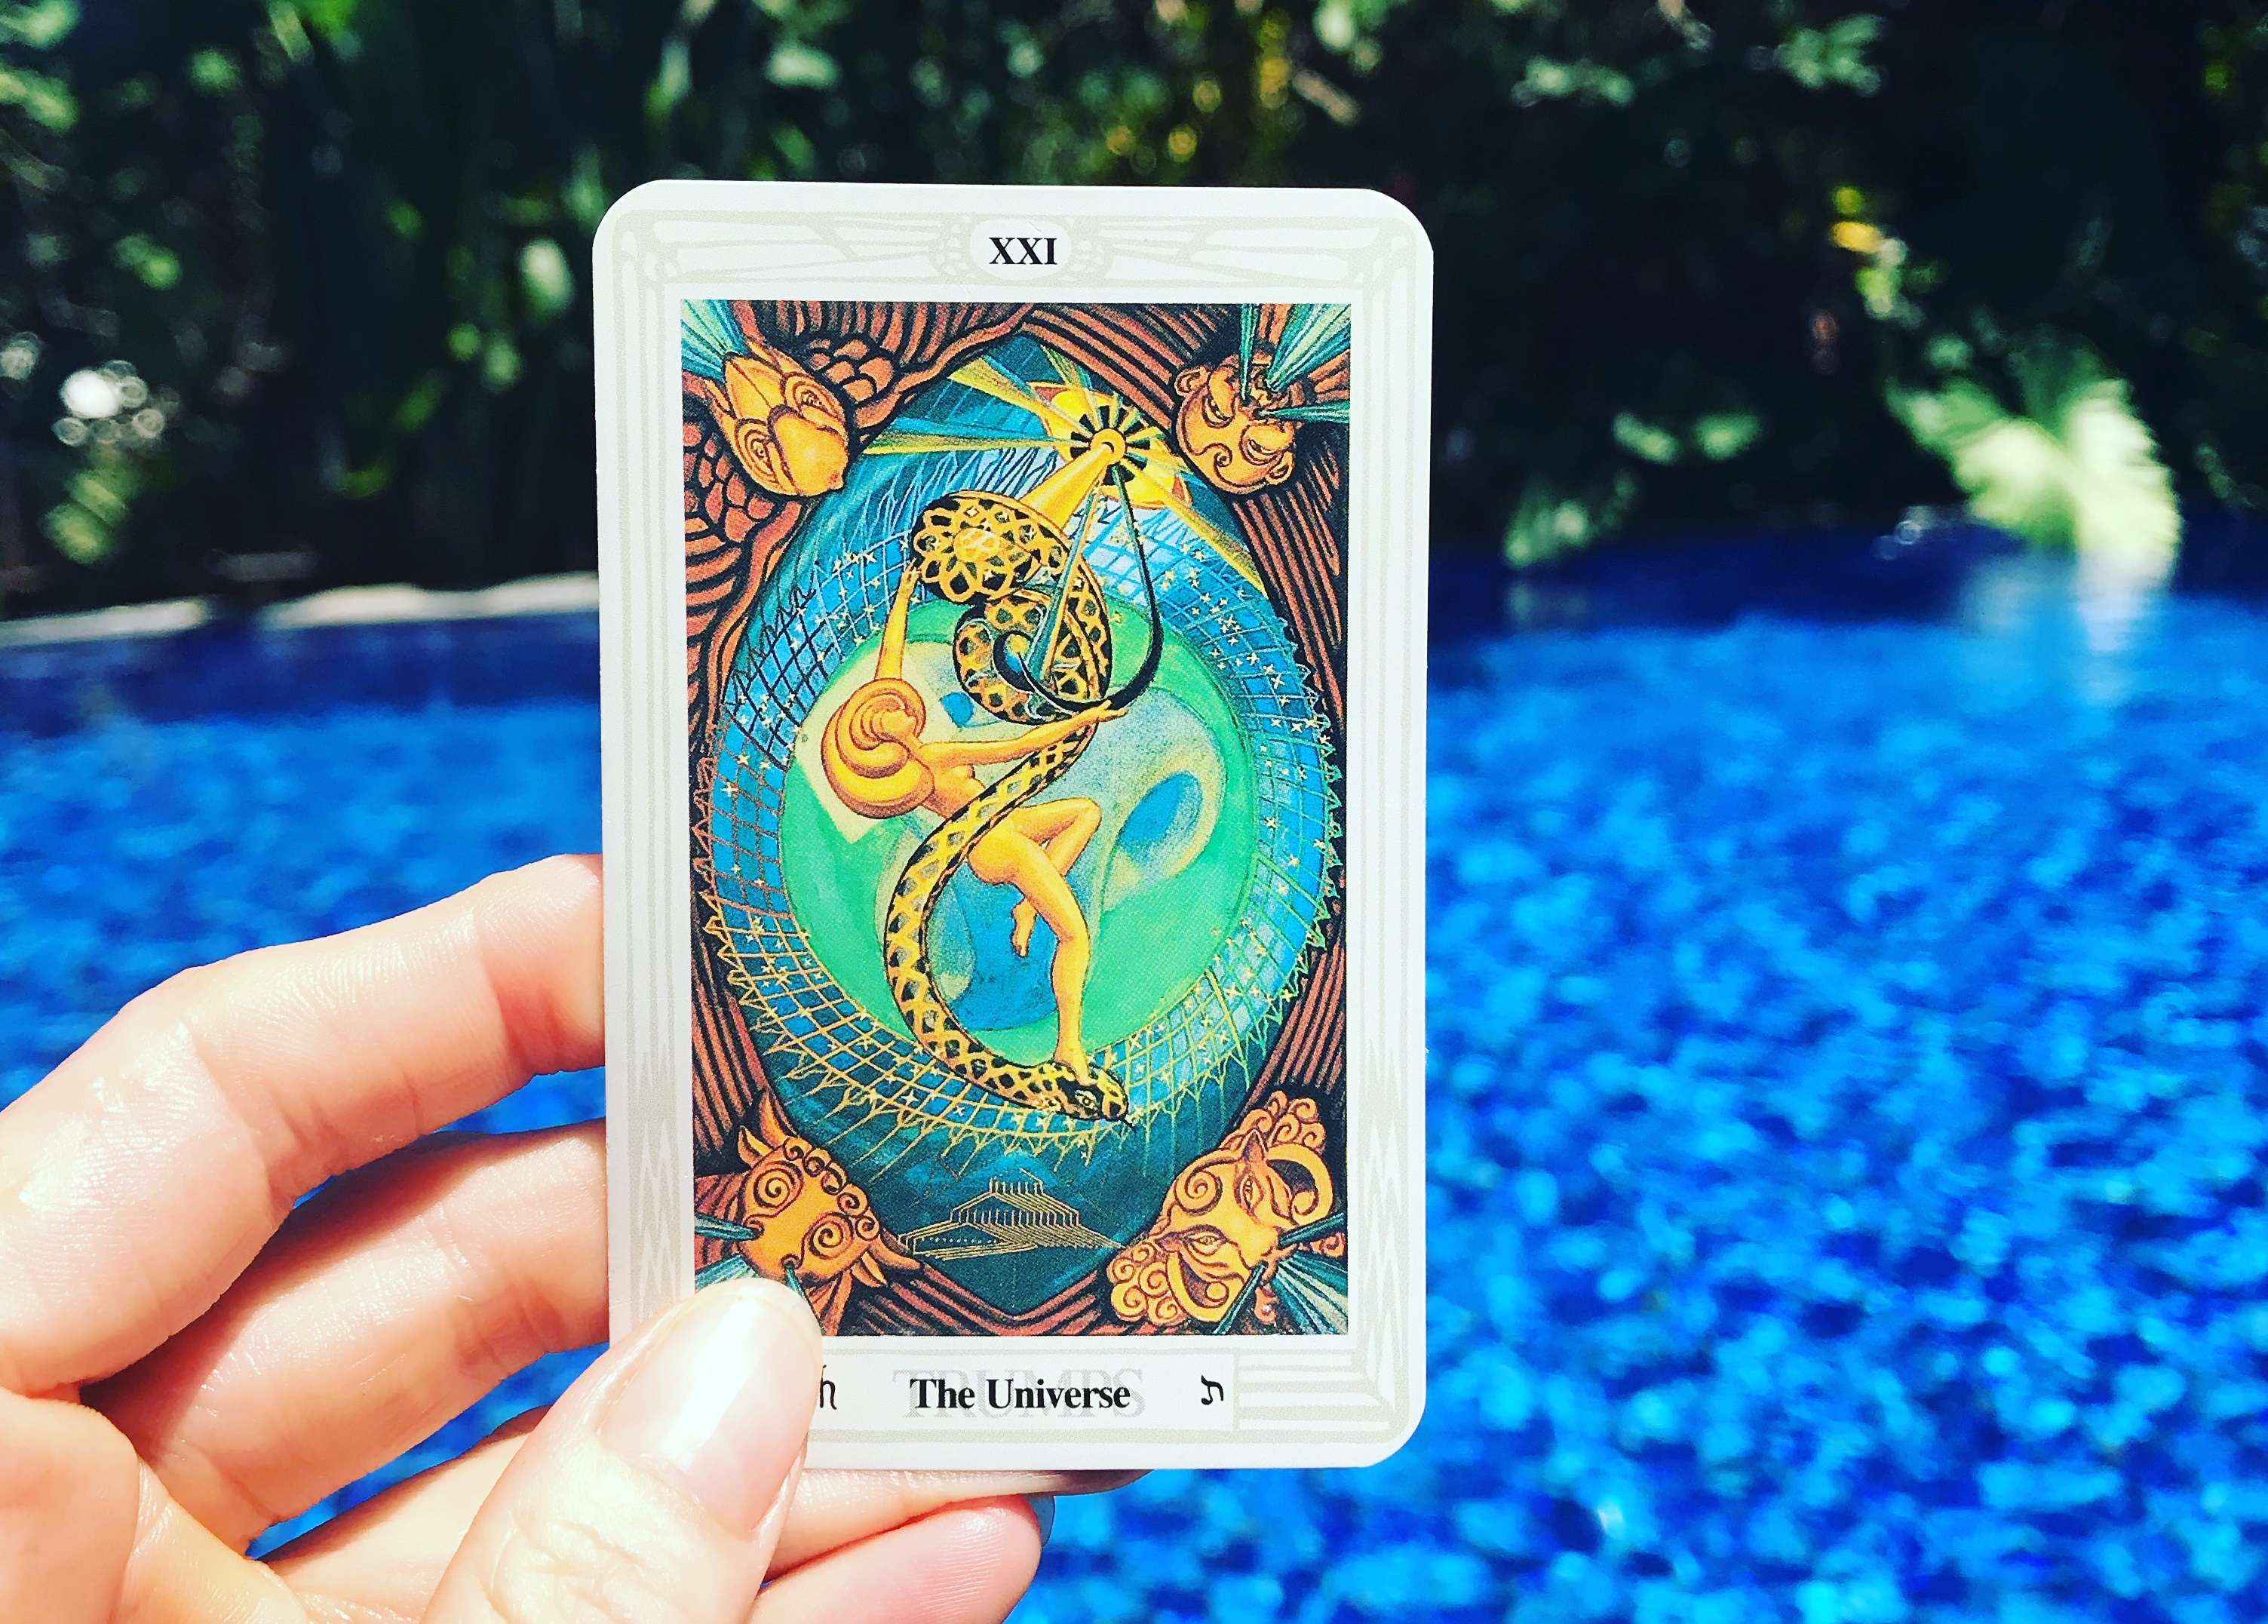 The Universe or world Tarot card, taken in front of the beautiful pool at Sanur, Bali at the Taksu hotel